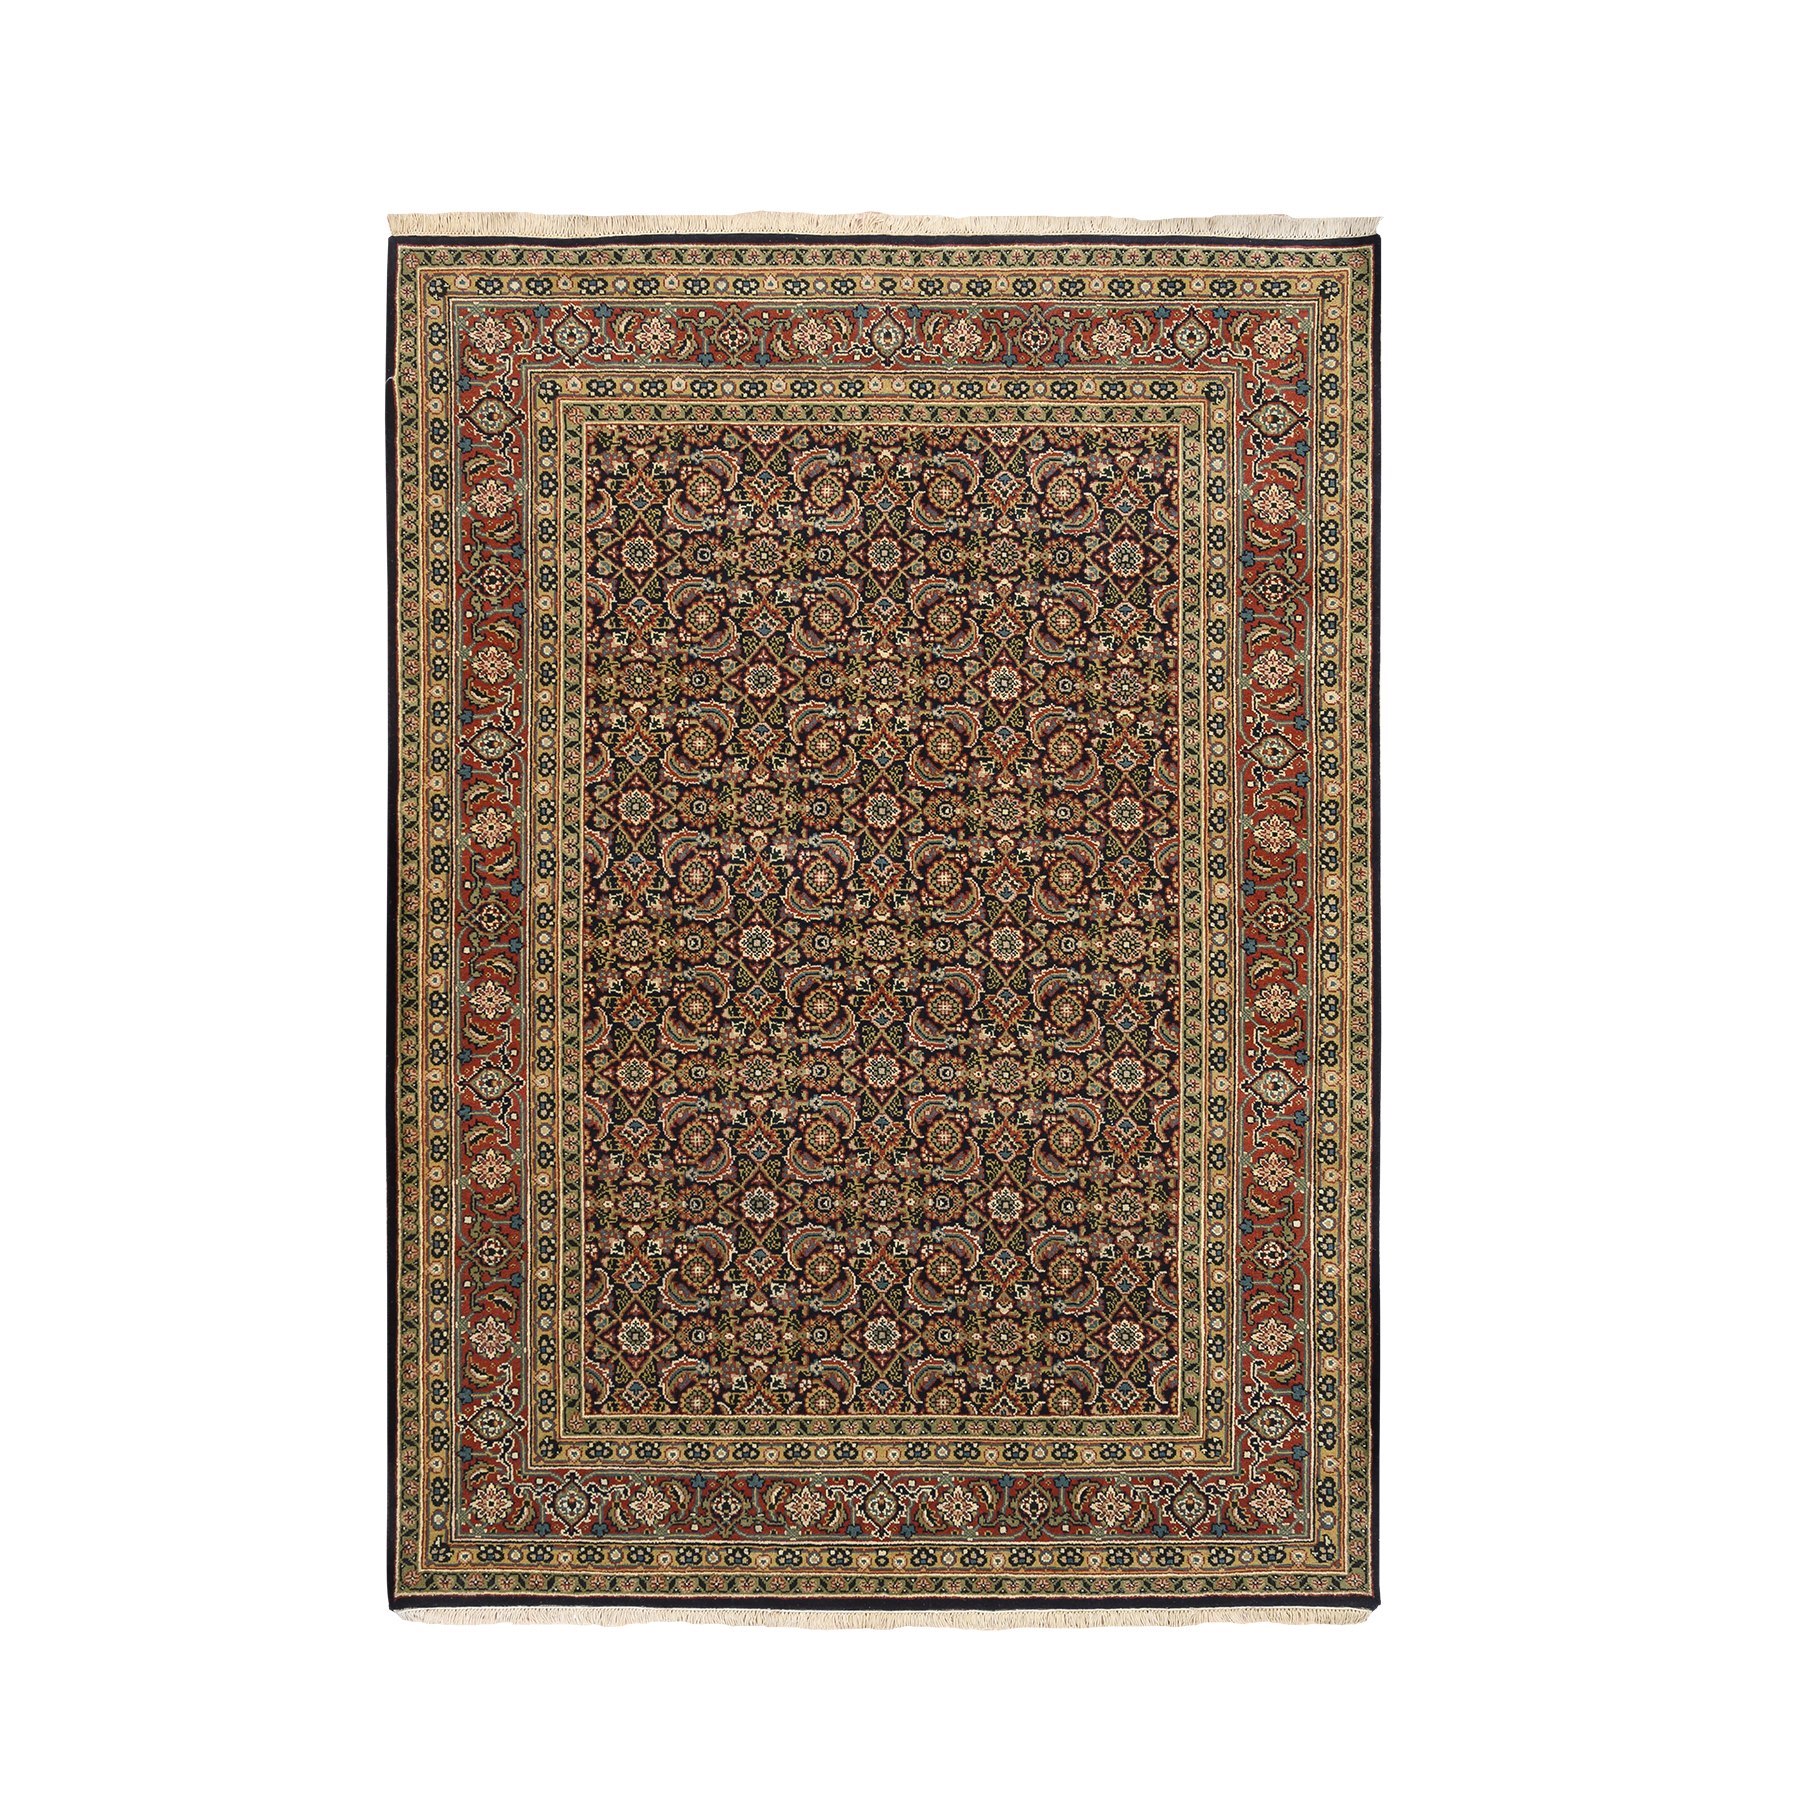 Pirniakan Collection Hand Knotted Blue Rug No: 1125954